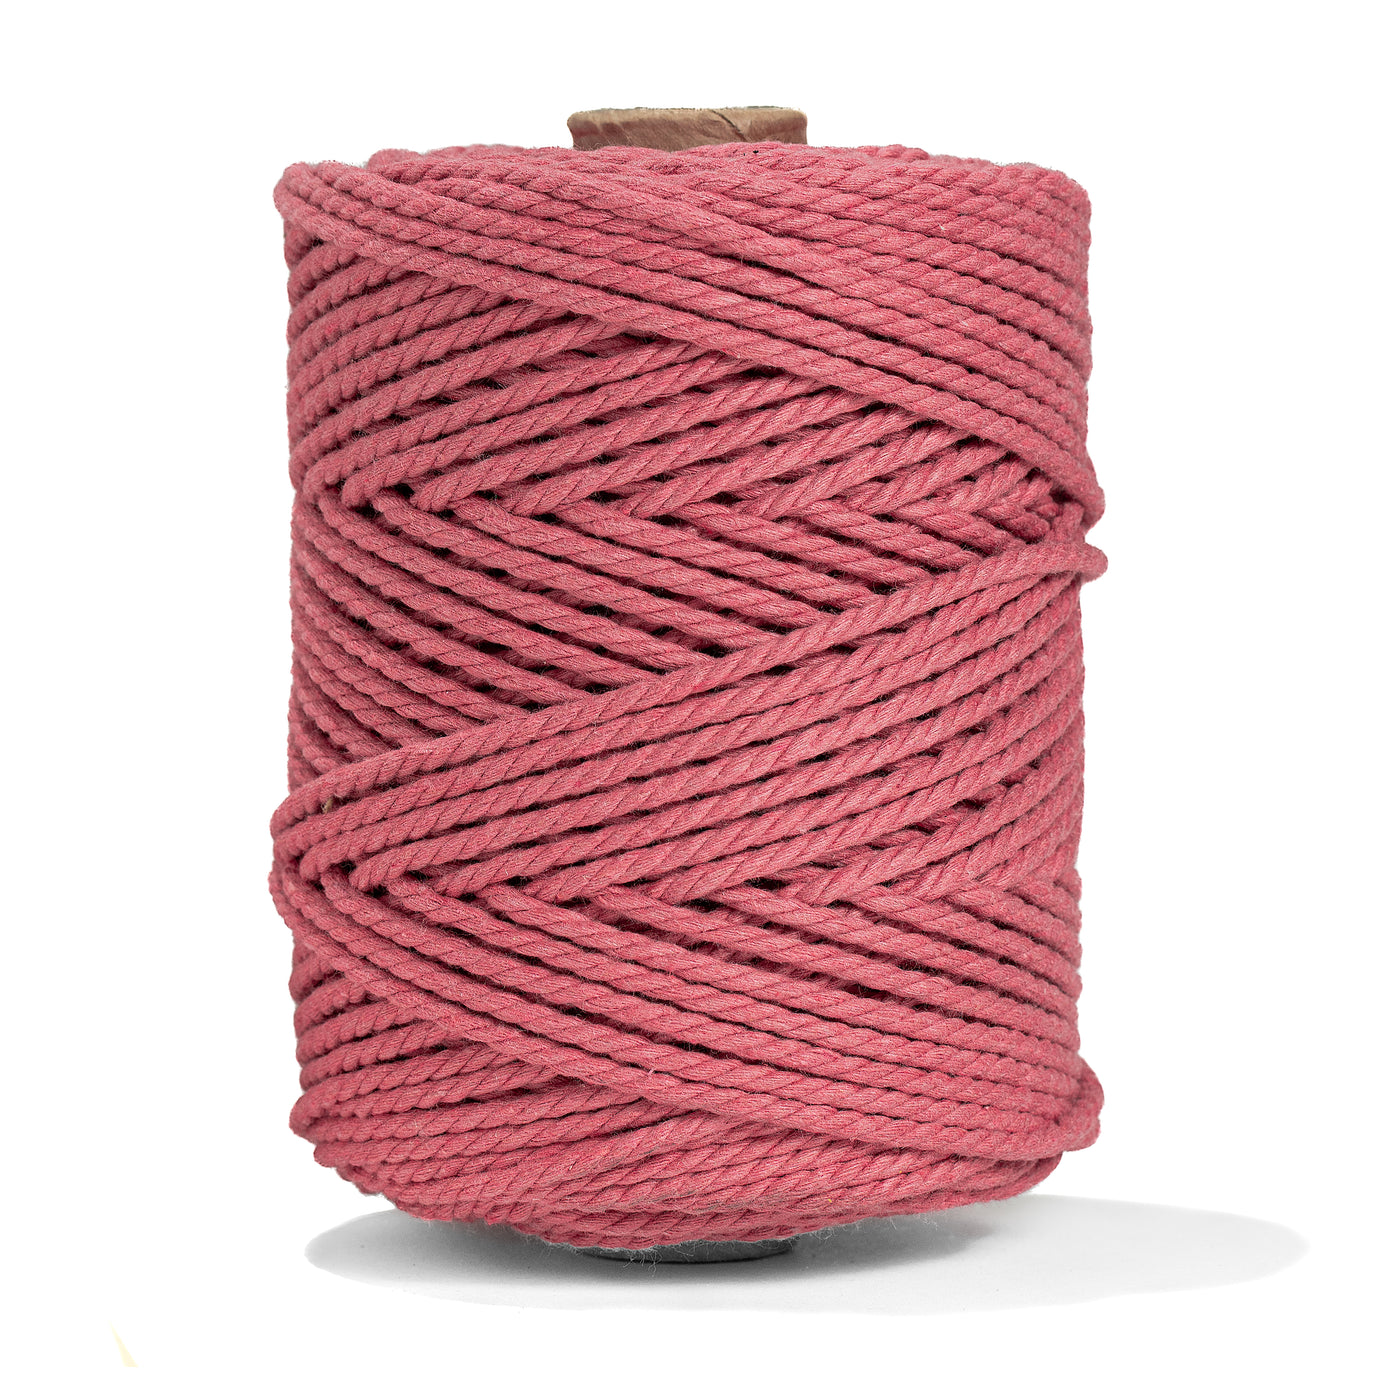 COTTON ROPE ZERO WASTE 3 MM - 3 PLY - HIBISCUS COLOR